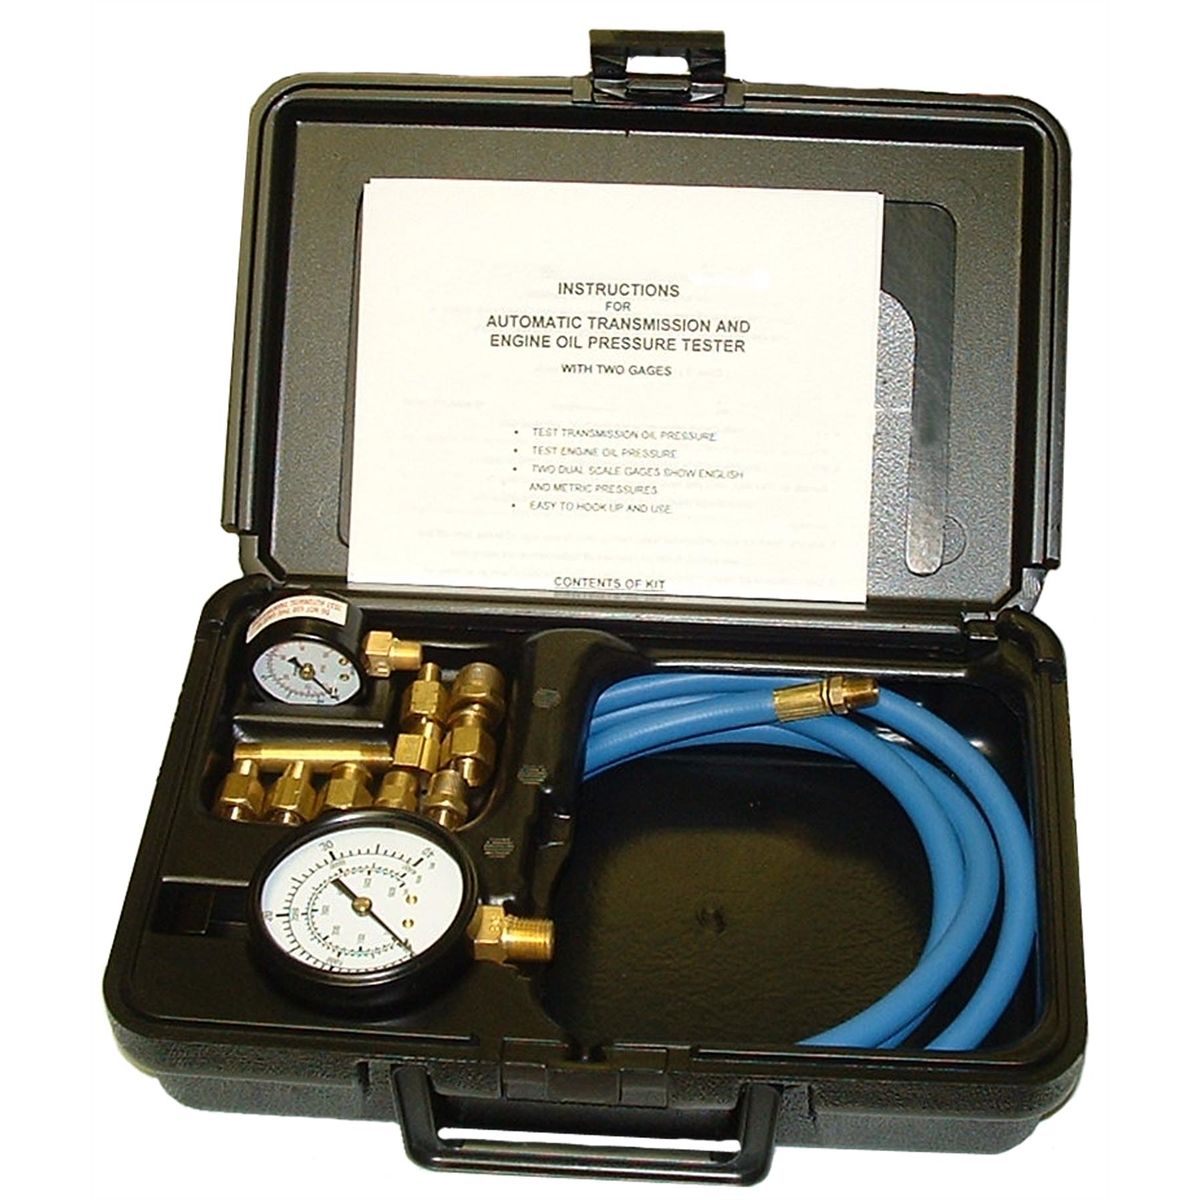 ATCL-TU-32-7 High Pressure Oil System Test Kit- Up to 5000 Psi 